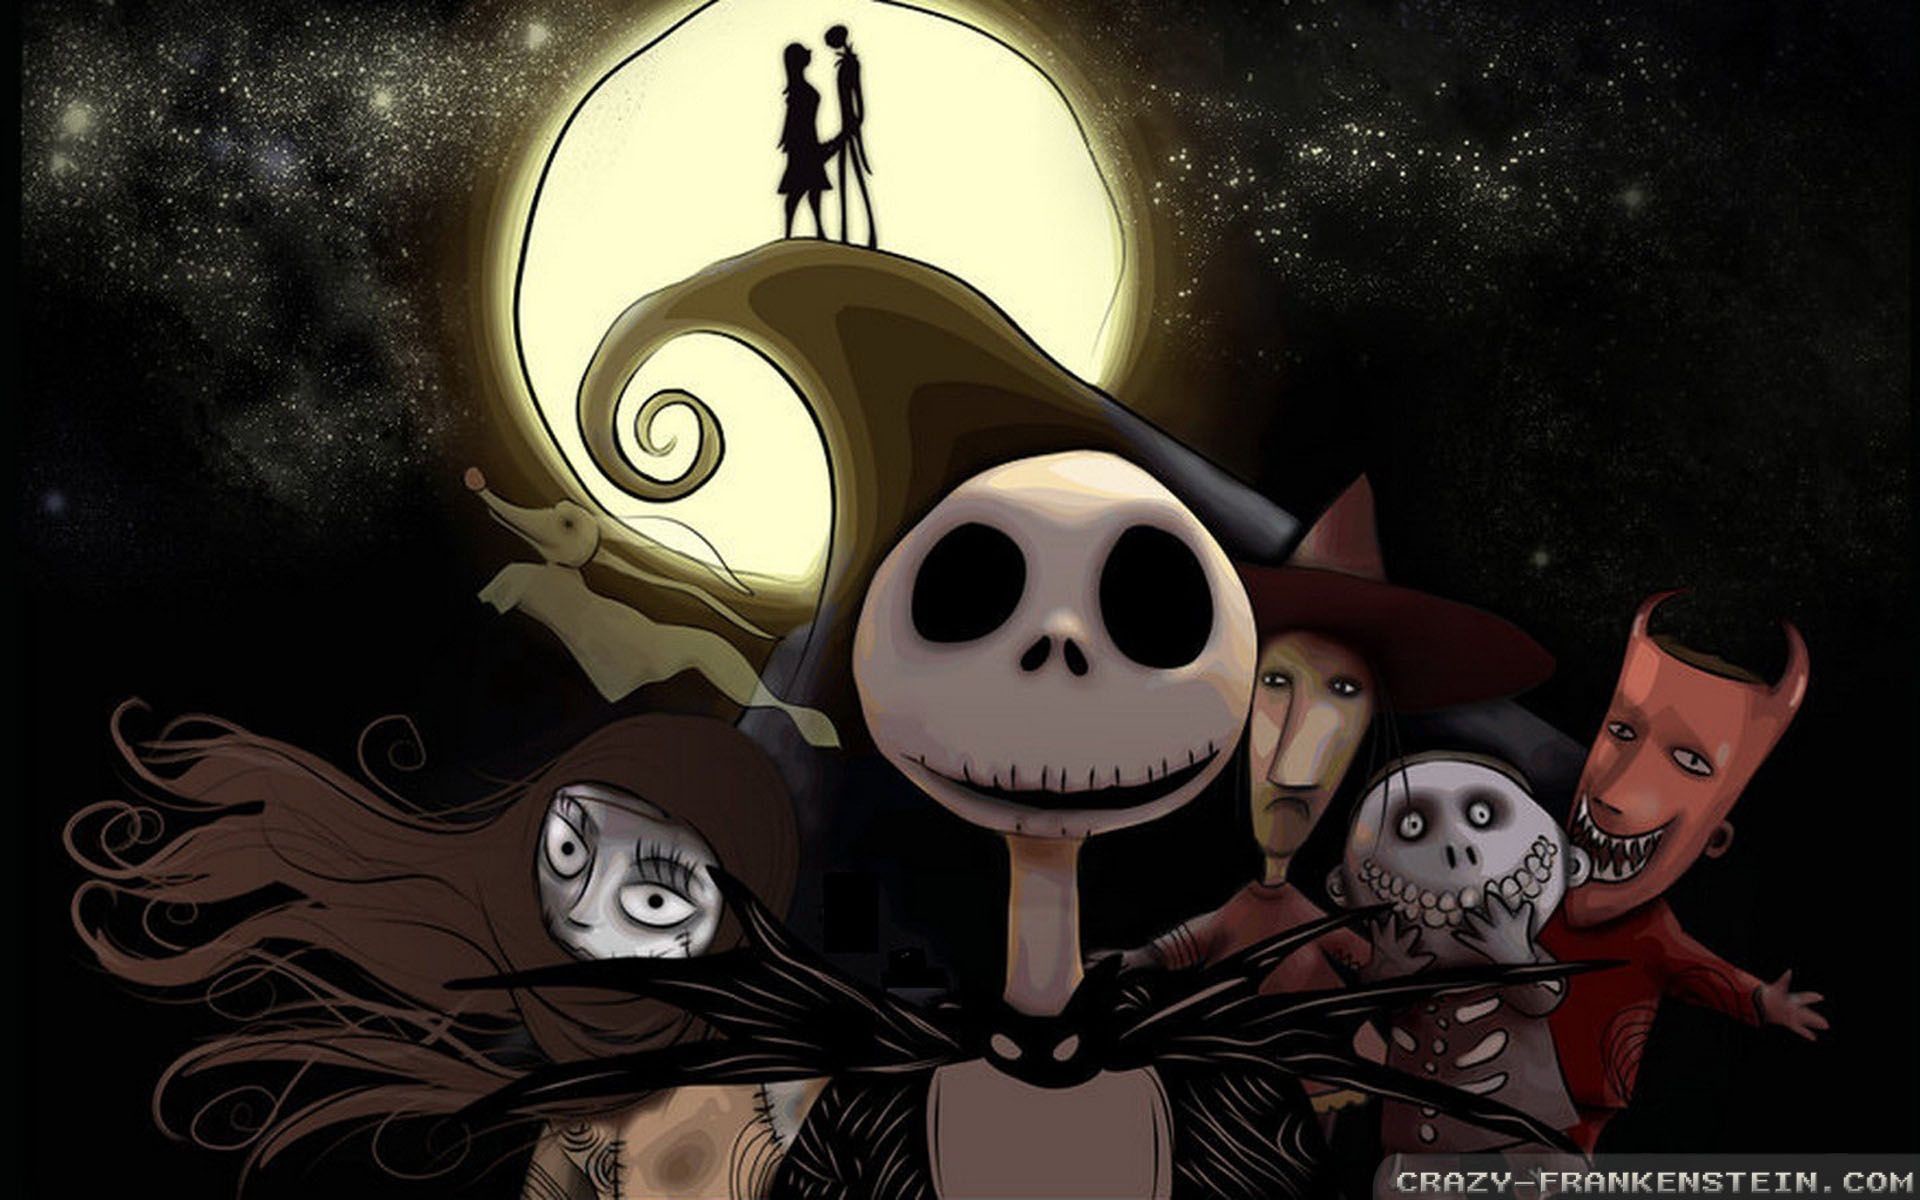 The Nightmare Before Christmas Wallpapers : Perfect wallpaper for my daught...